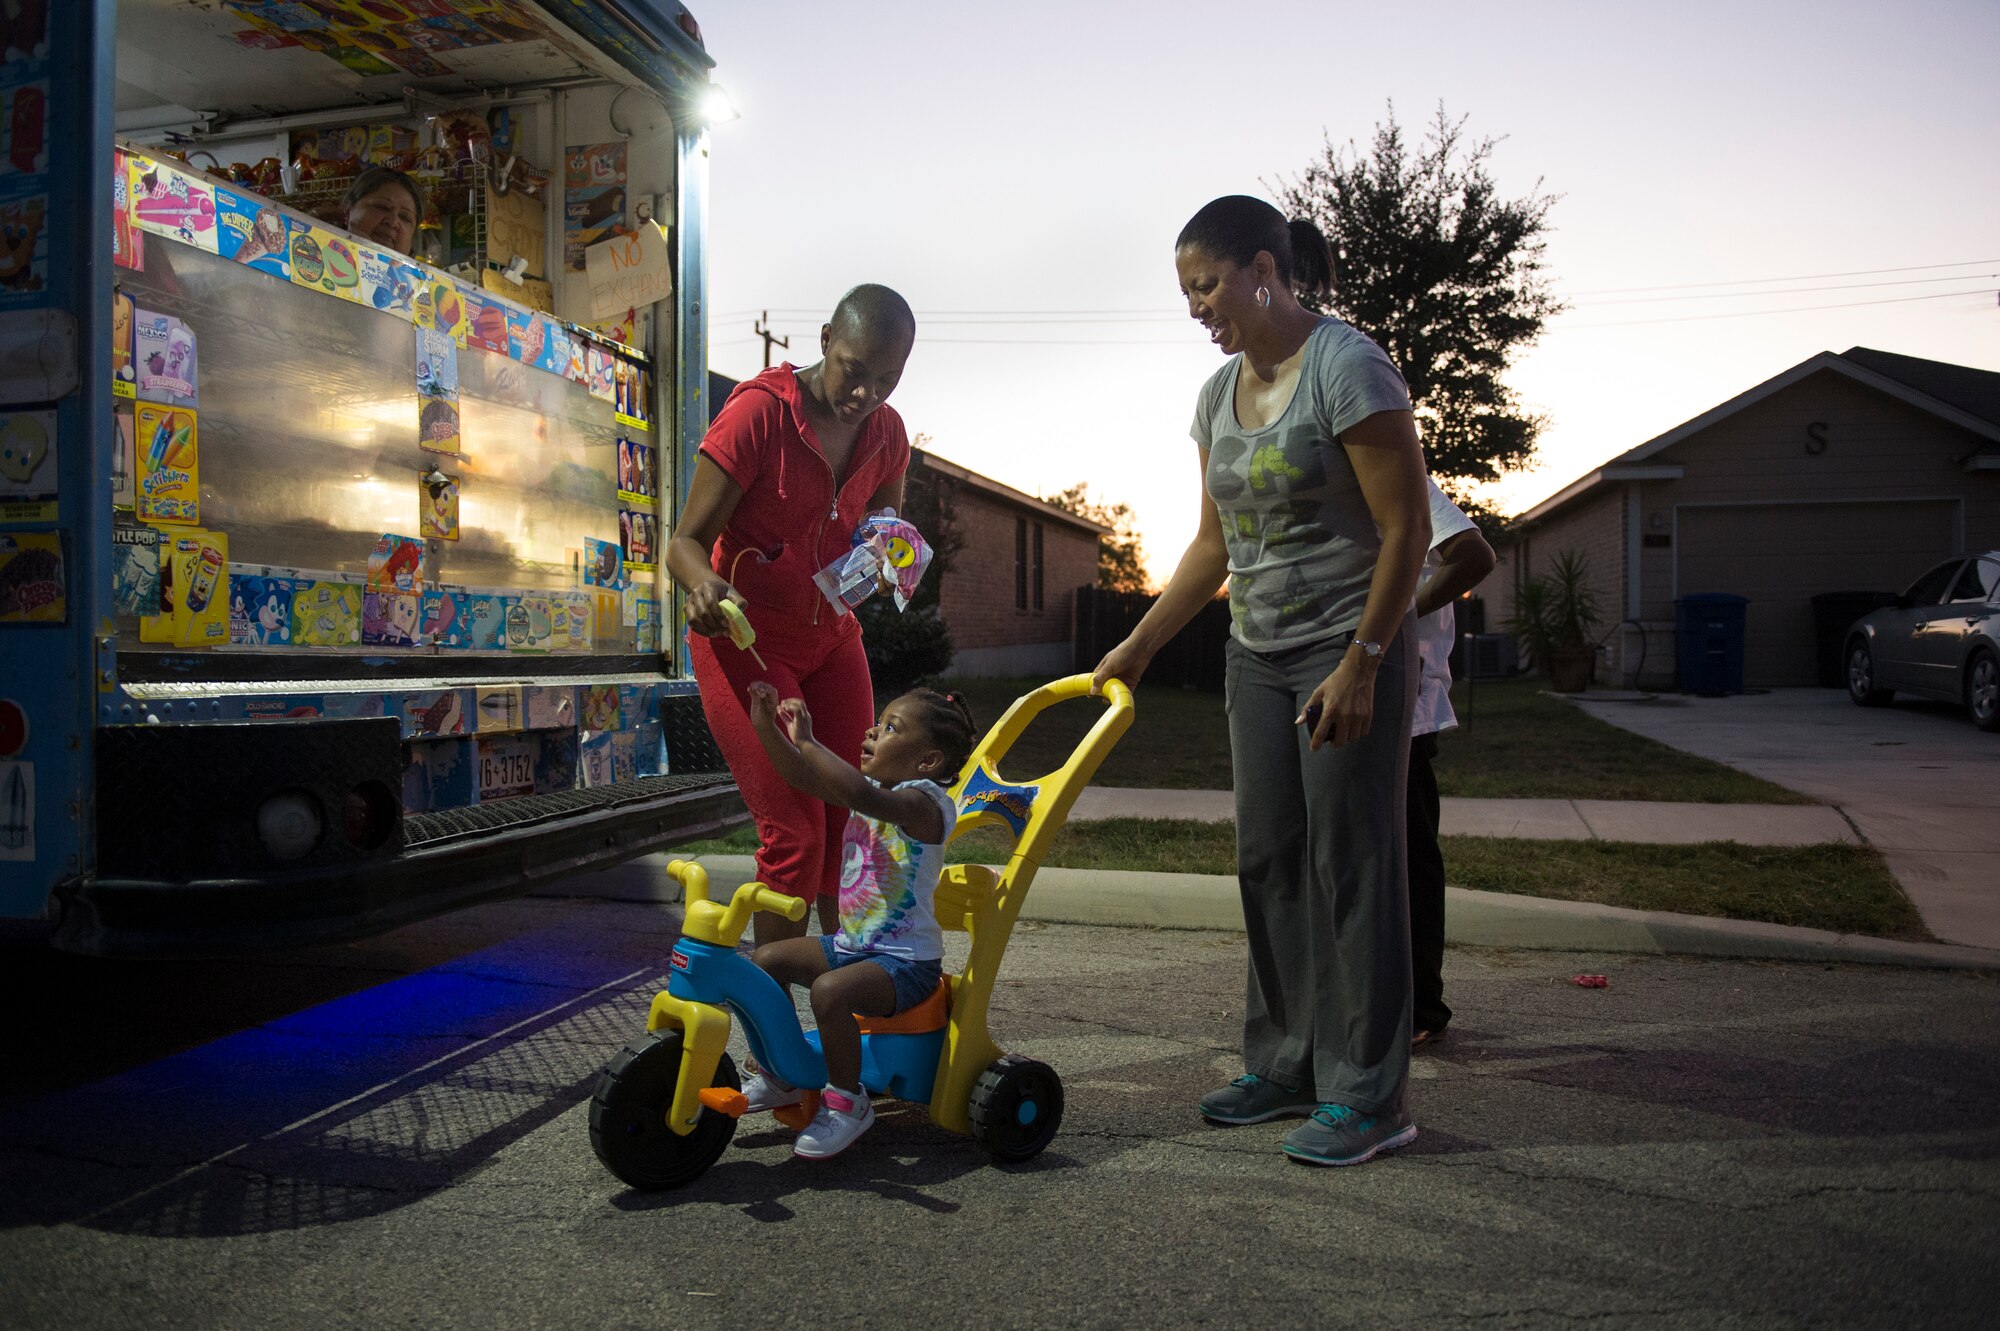 Somaya, 2, daughter of Staff Sgt. Chantel Thibeaux, Joint Base-Fort Sam Houston, Texas, dental assistant instructor, reaches up for Ice cream as her grandmother Carla guides her Big Wheel.  At two years old, Somaya is unaware of her mothers battle with cancer and tried to play with her every chance she can, but is limited to certain activities. About 15 family and friends gathered at her house to celebrate a successful surgery and provide love to Thibeaux during her quest to defeat cancer. (U.S. Air Force photo/Staff Sgt. Vernon Young Jr.)